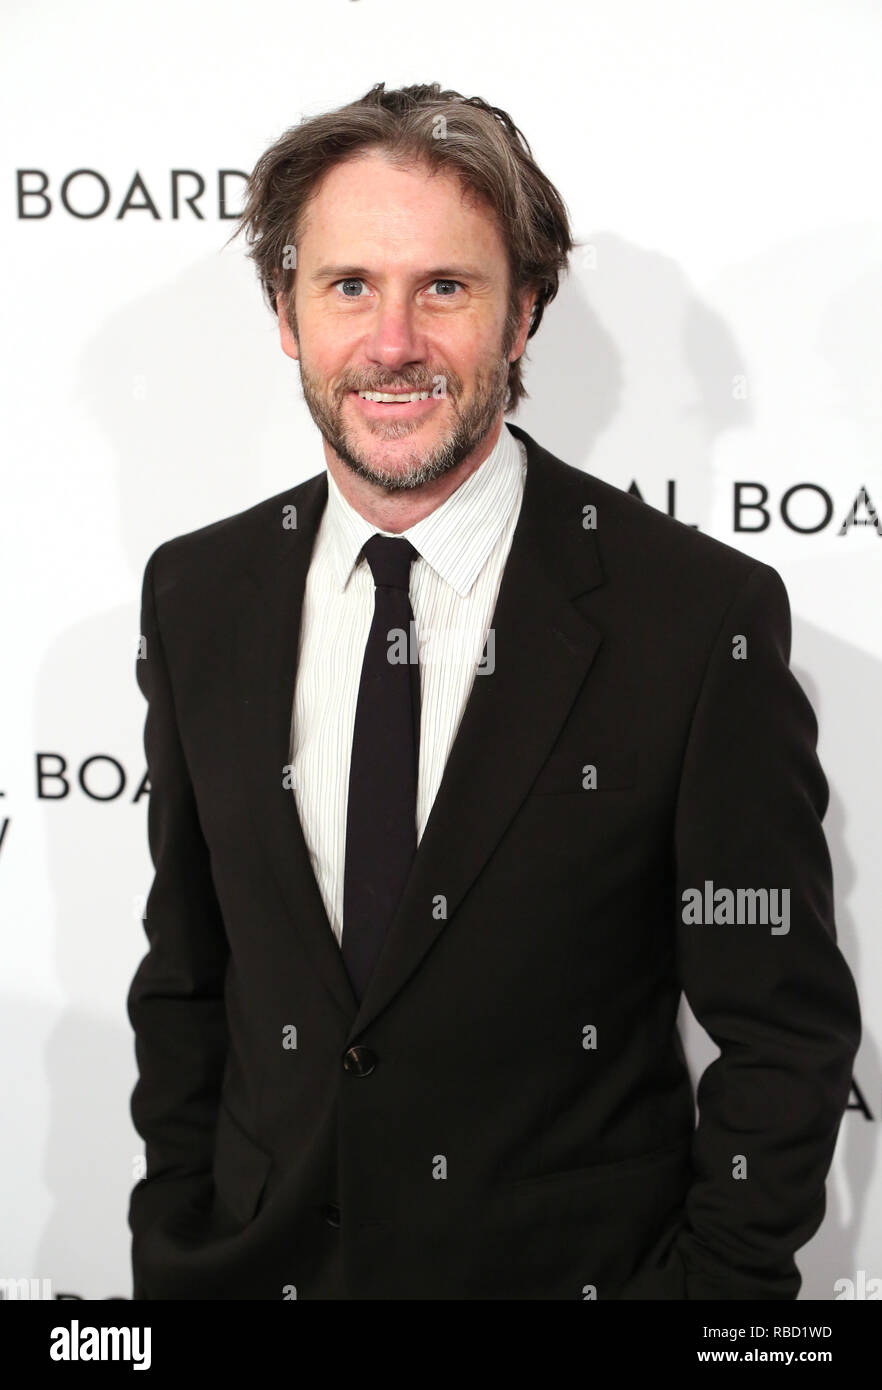 Josh Hamilton besucht die 2019 National Board of Review Gala an Cipriani 42nd Street am Januar 08, 2019 in New York City. Quelle: Walter McBride/MediaPunch Stockfoto